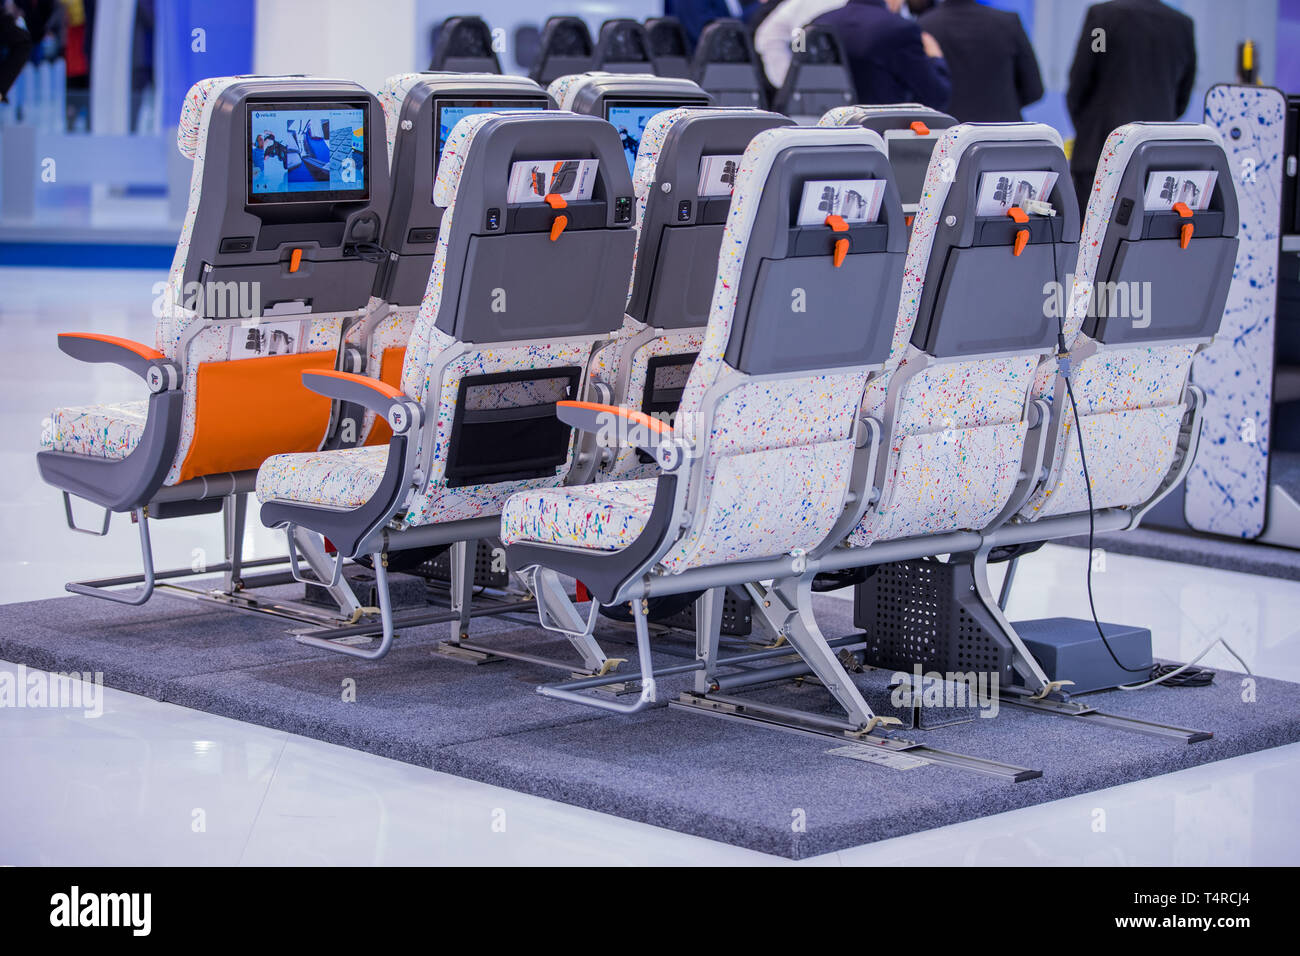 Hamburg Germany 03rd Apr 2019 The Avio Interiors Stand At The Aircraft Interiors Expo Trade Fair Will Pass A Computer Graphic Of The New Cabin Interior For The Airbus A330neo More Than 500 Exhibitors Present News And Innovations For The Aircraft Cabin At The Fair Credit Jens Bttnerdpa Zentralbildzbdpaalamy Live News T4RCJ4 